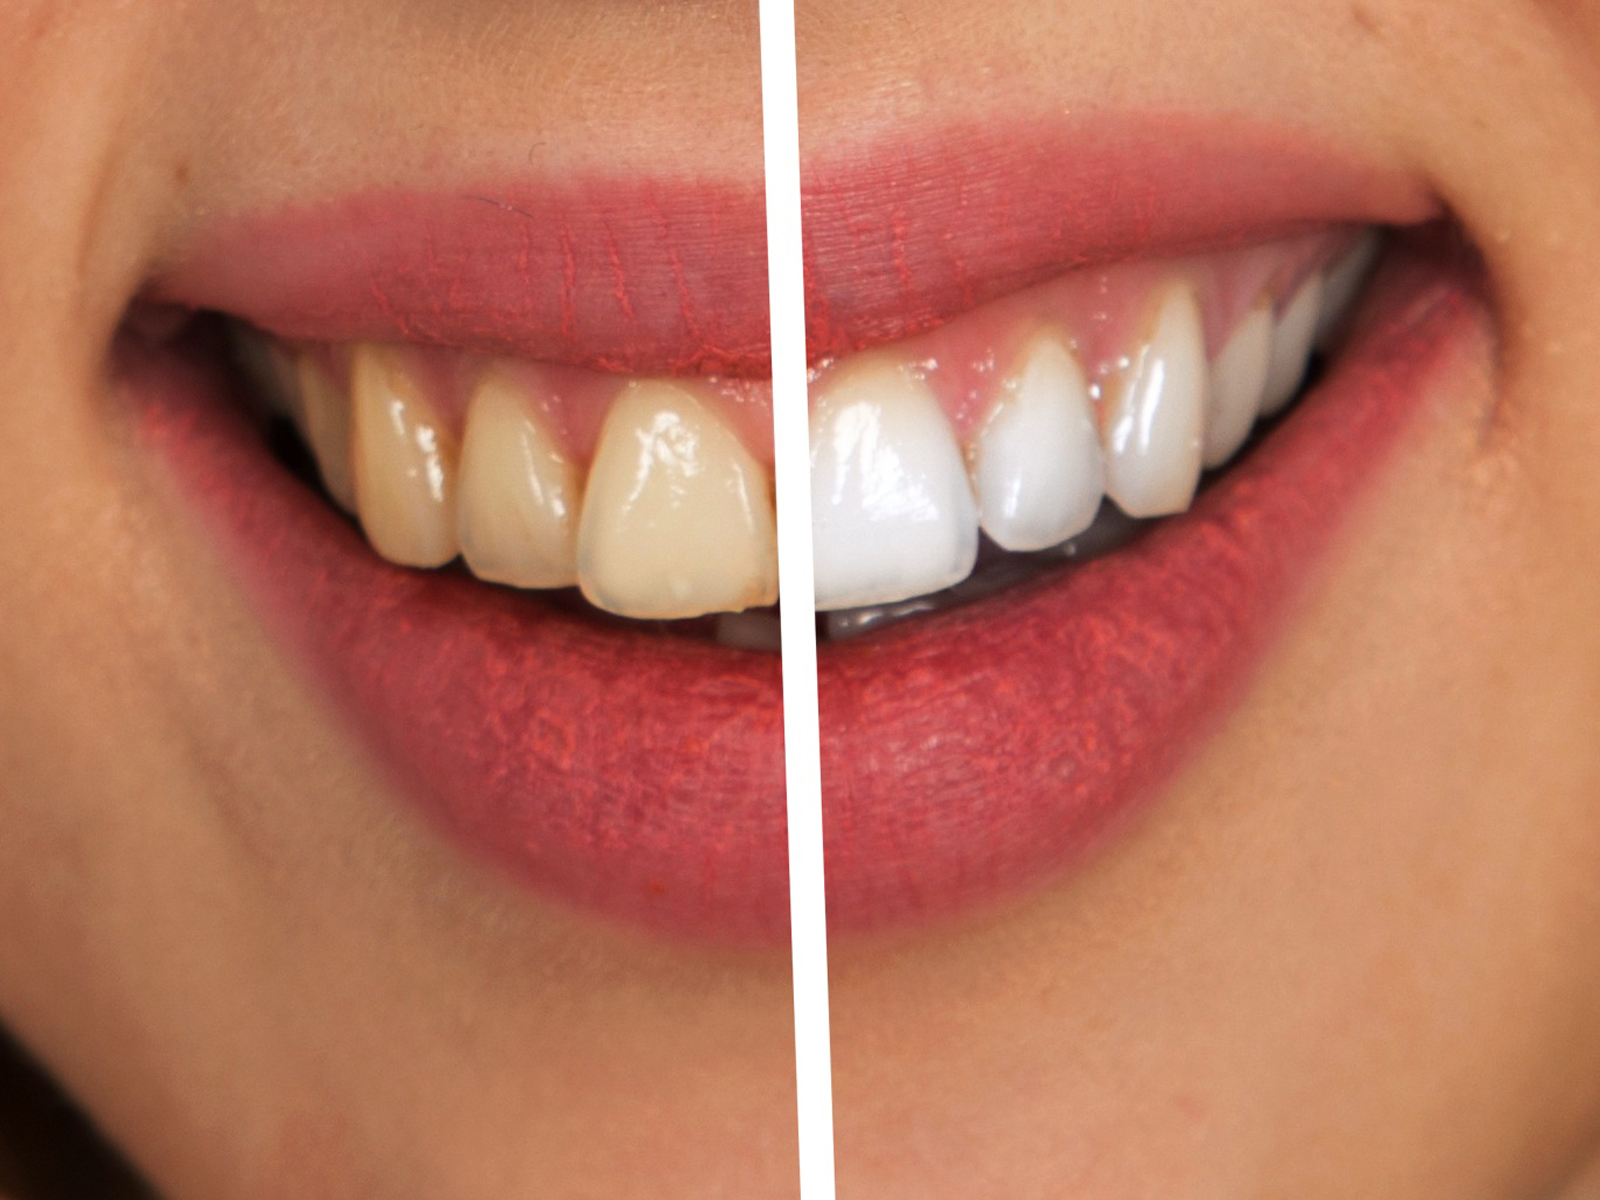 How can I whiten my teeth quickly?